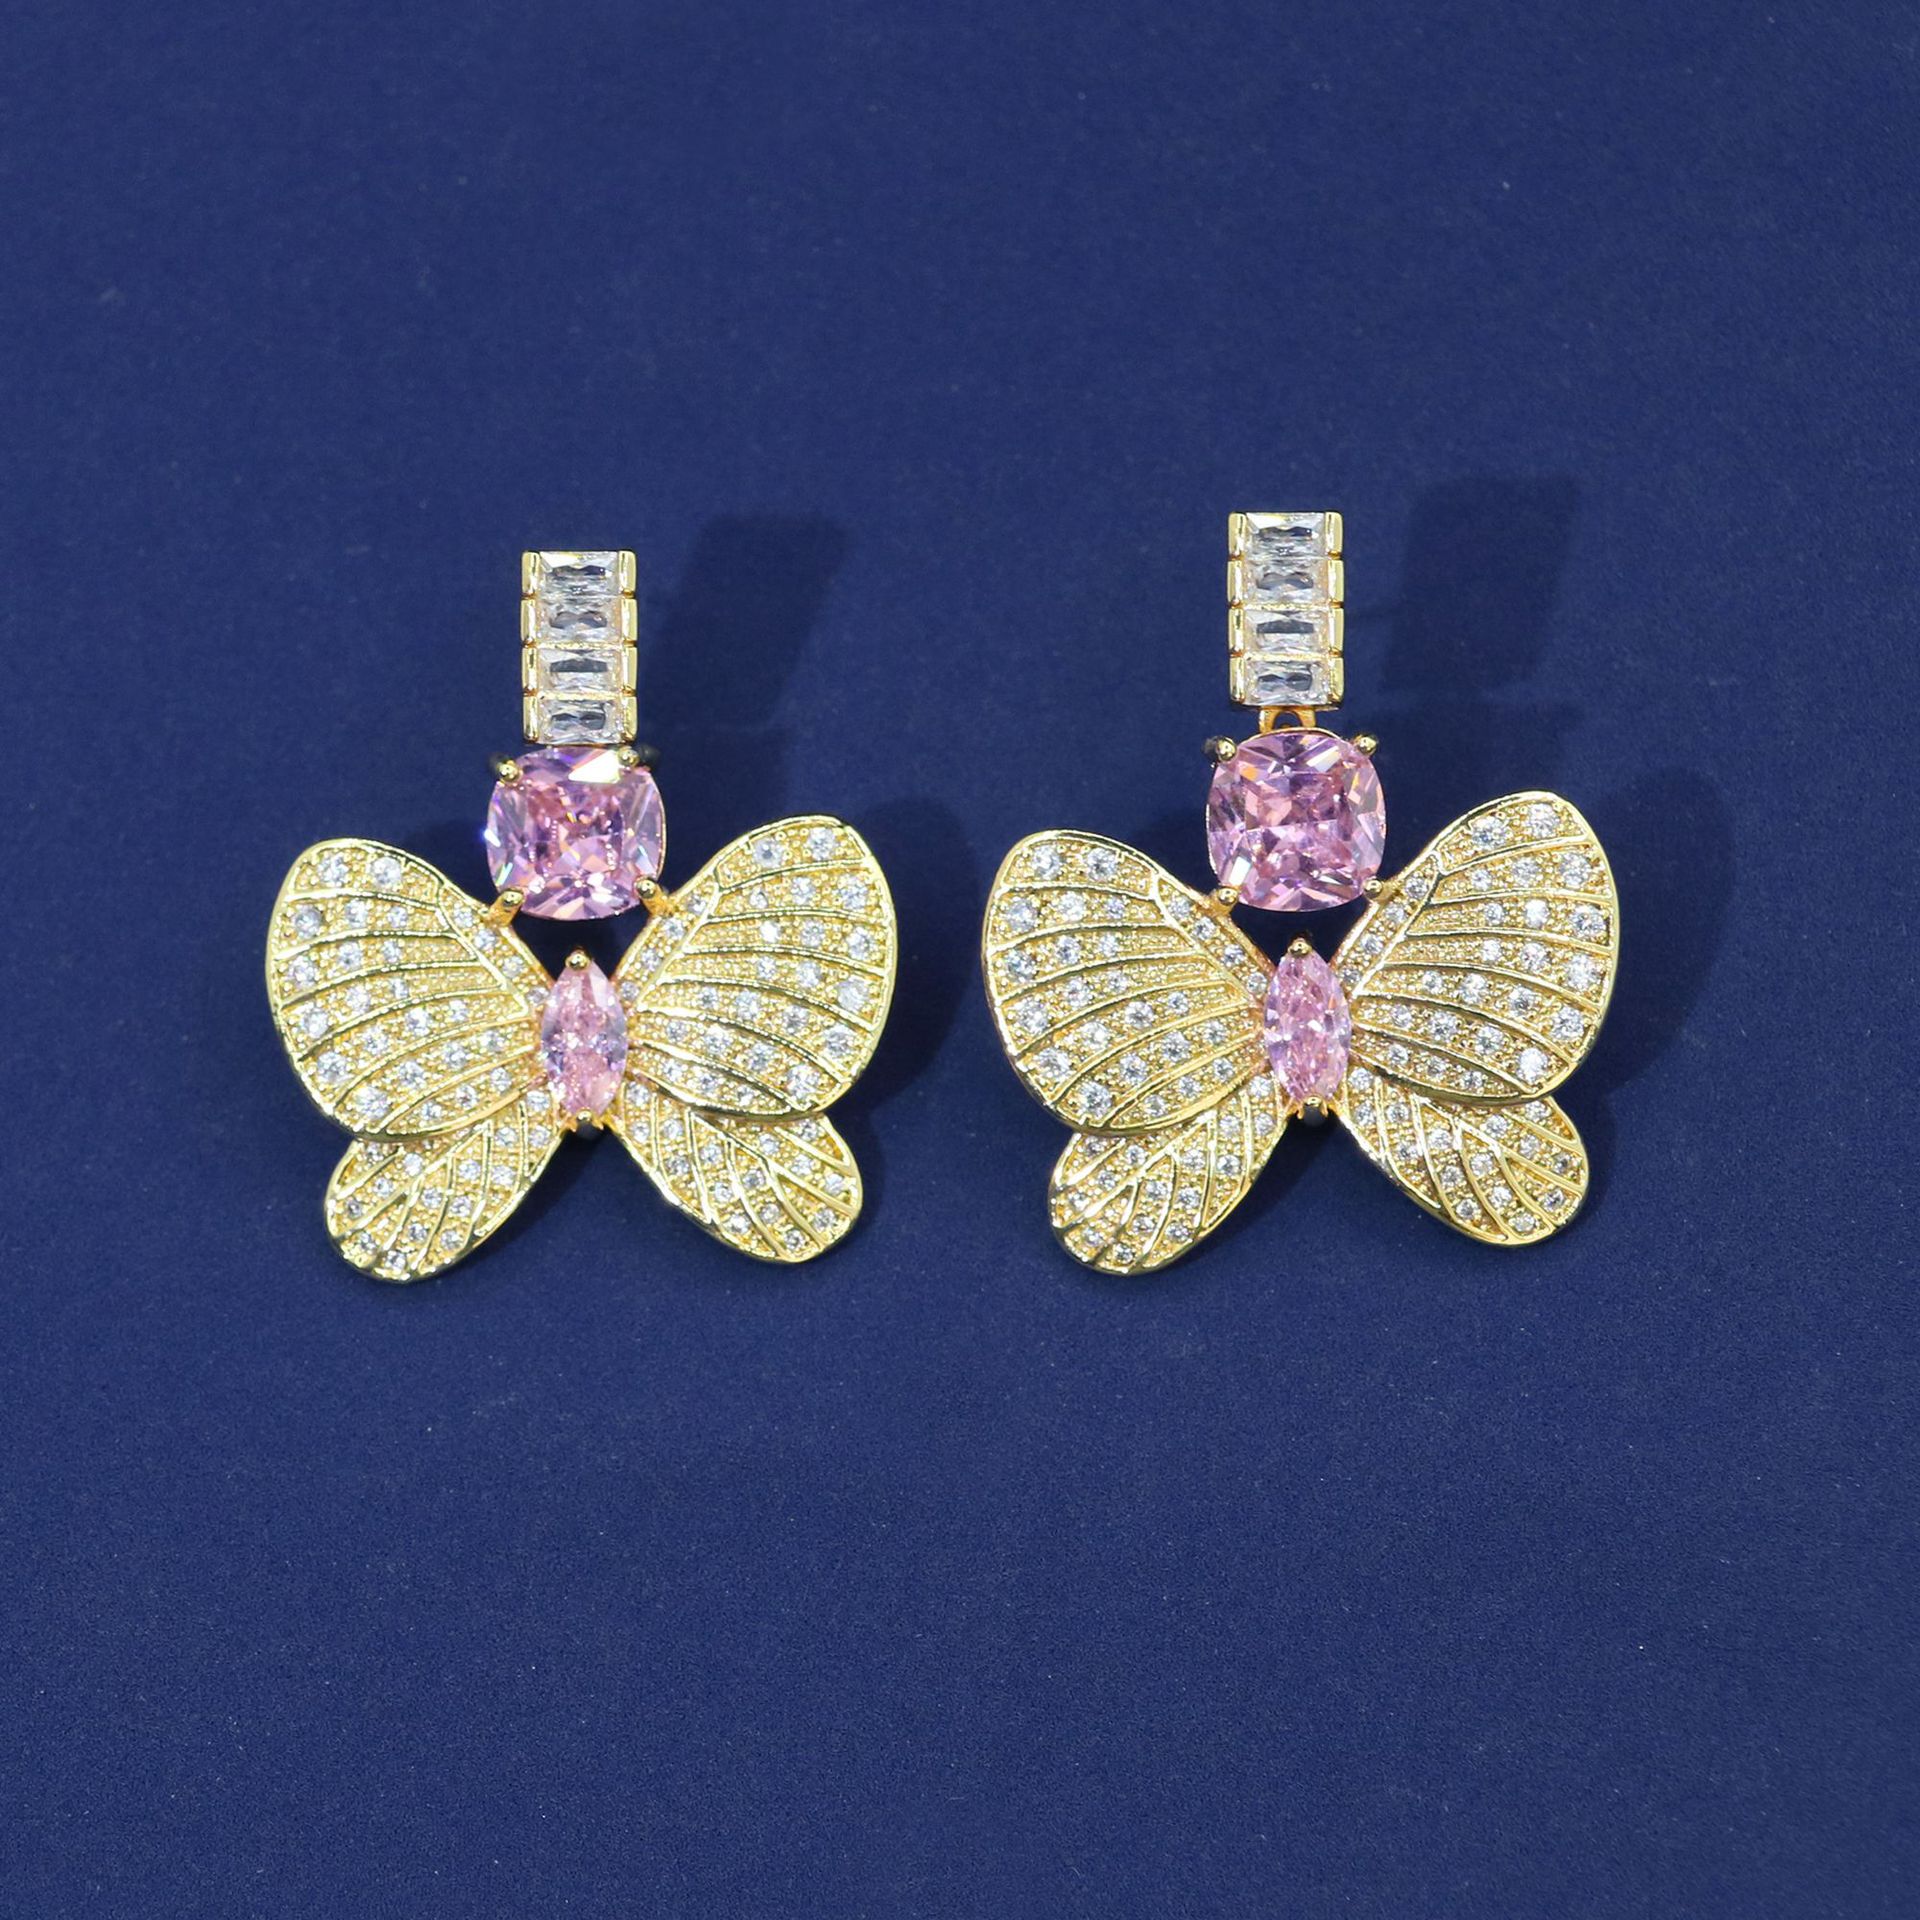 3:Zirconium earrings with gold foundation